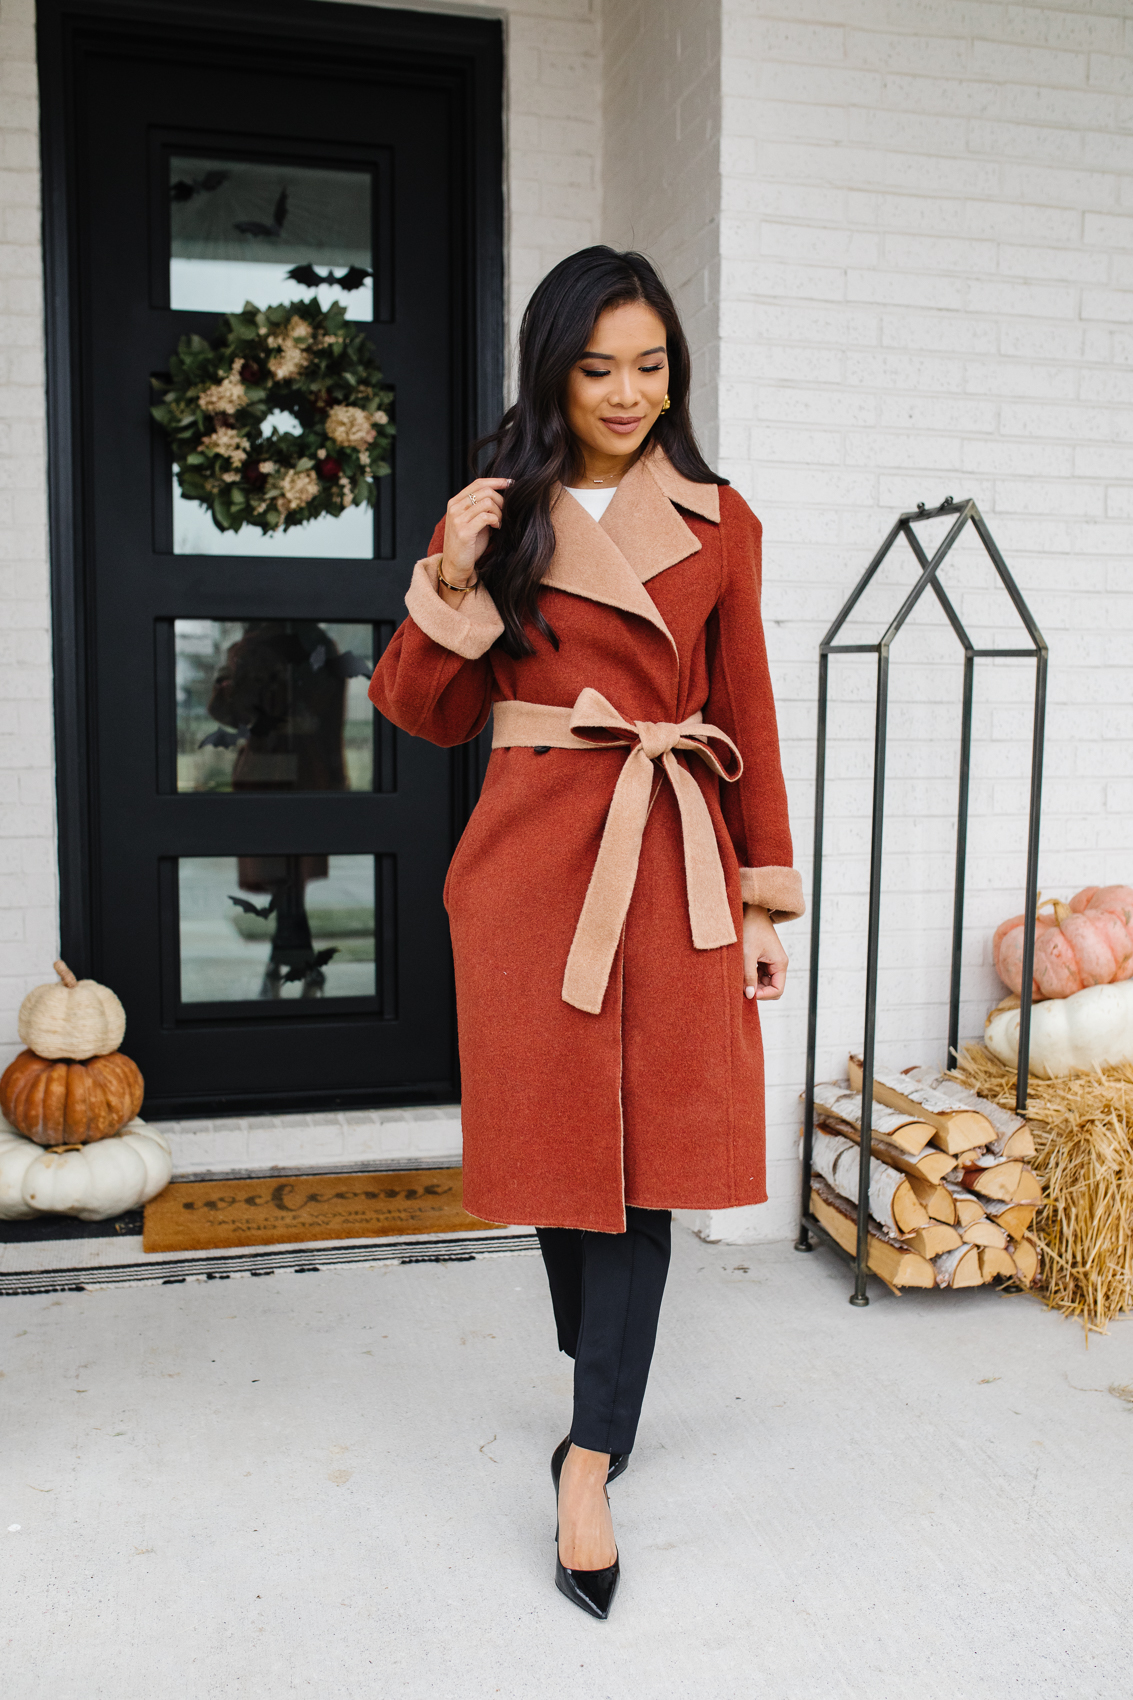 Blogger Hoang-Kim wearing a reversible coat by M.M.LaFleur with the best black pants and heels for a fall outfit